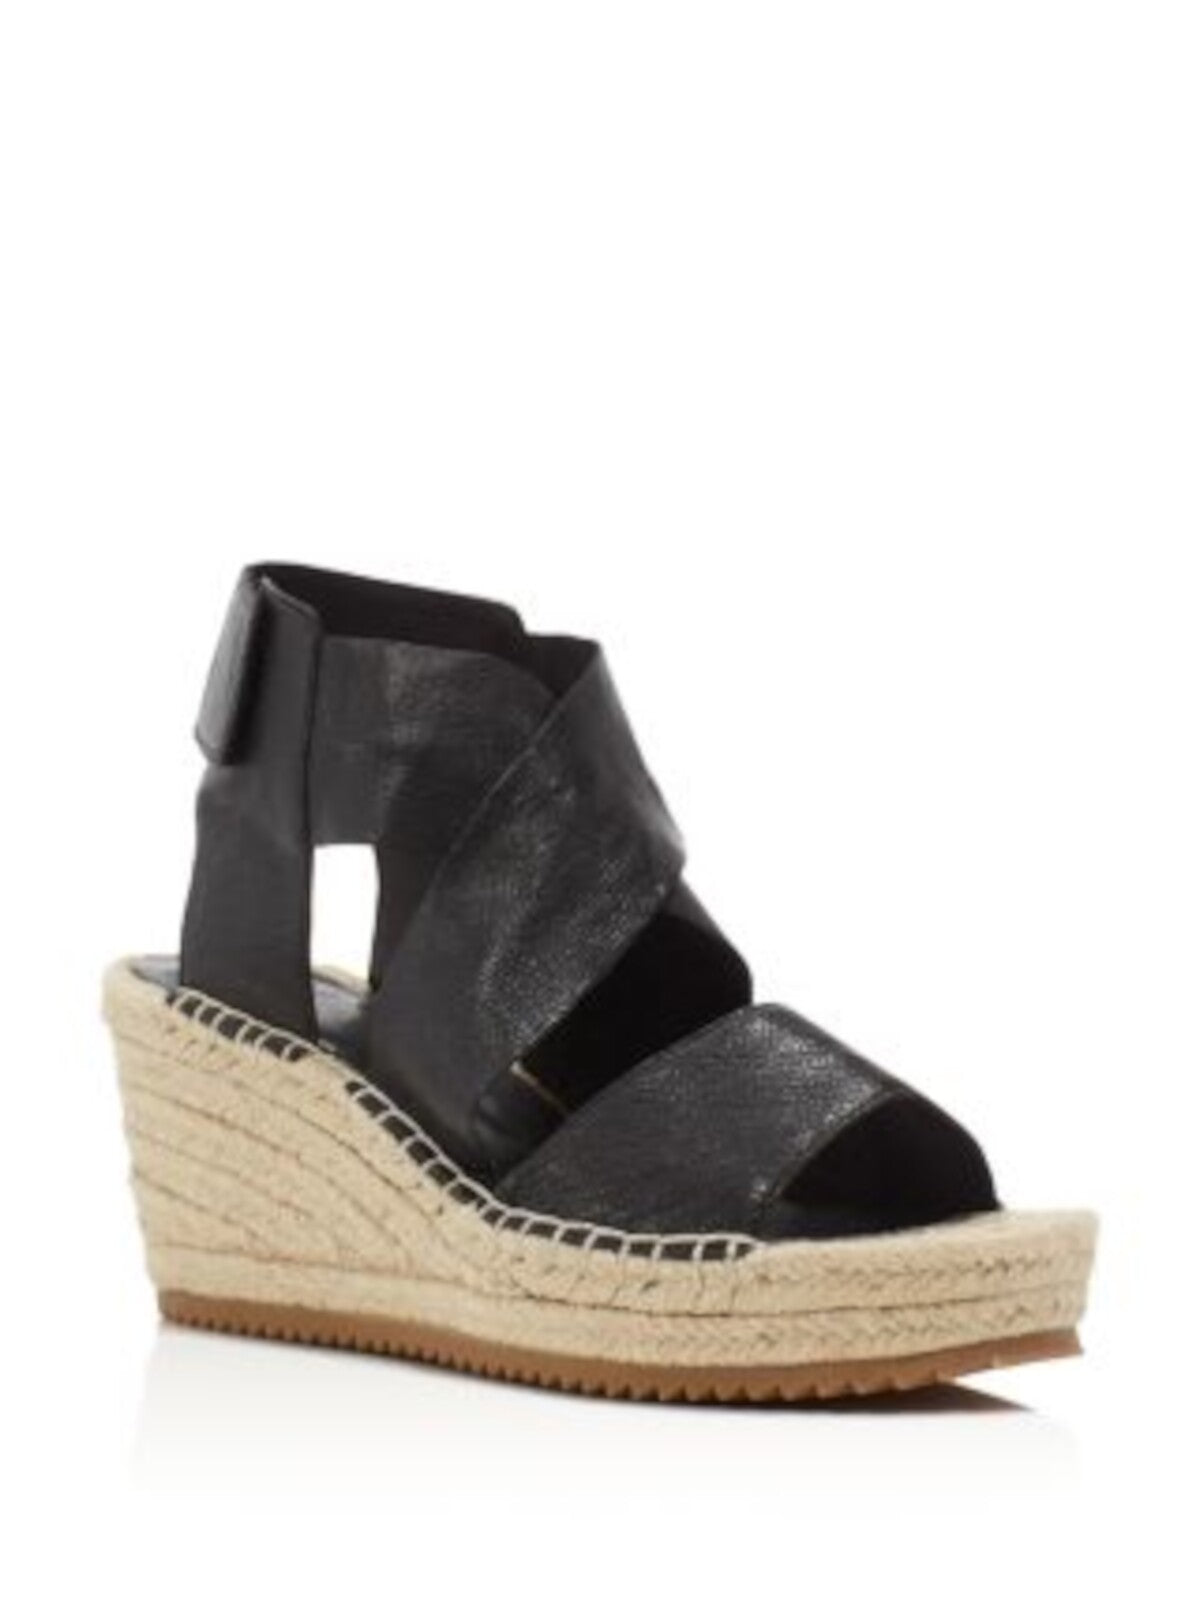 EILEEN FISHER Womens Black 1" Platform Crisscross Straps Sawtooth Sole Padded Willow Open Toe Wedge Leather Espadrille Shoes 6.5